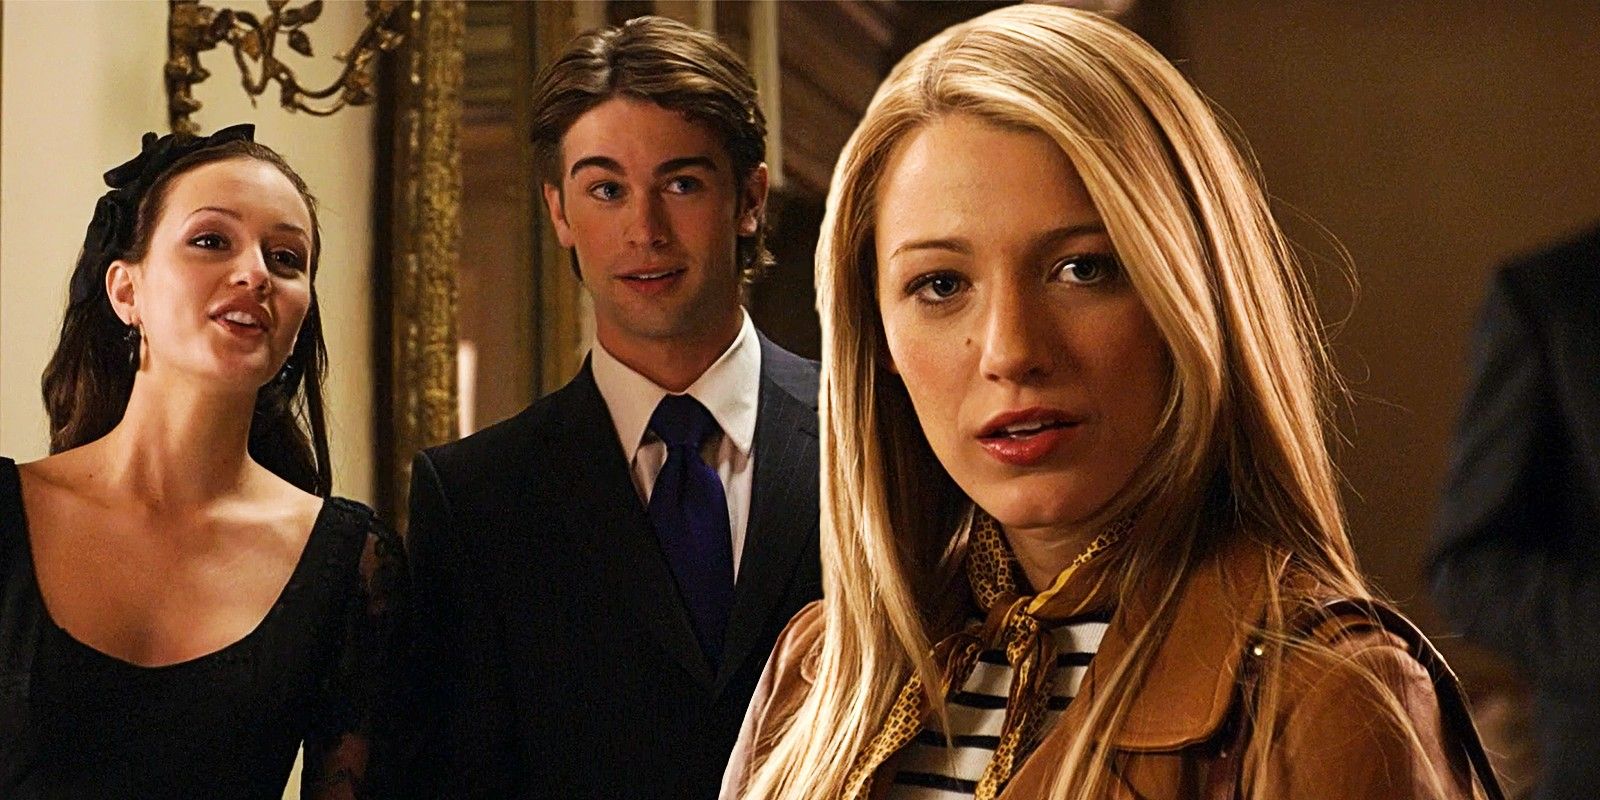 Leighton Meester as Blair, Chace Crawford as Nate, and Blake Lively as Serena in Gossip Girl season 1 episode 1